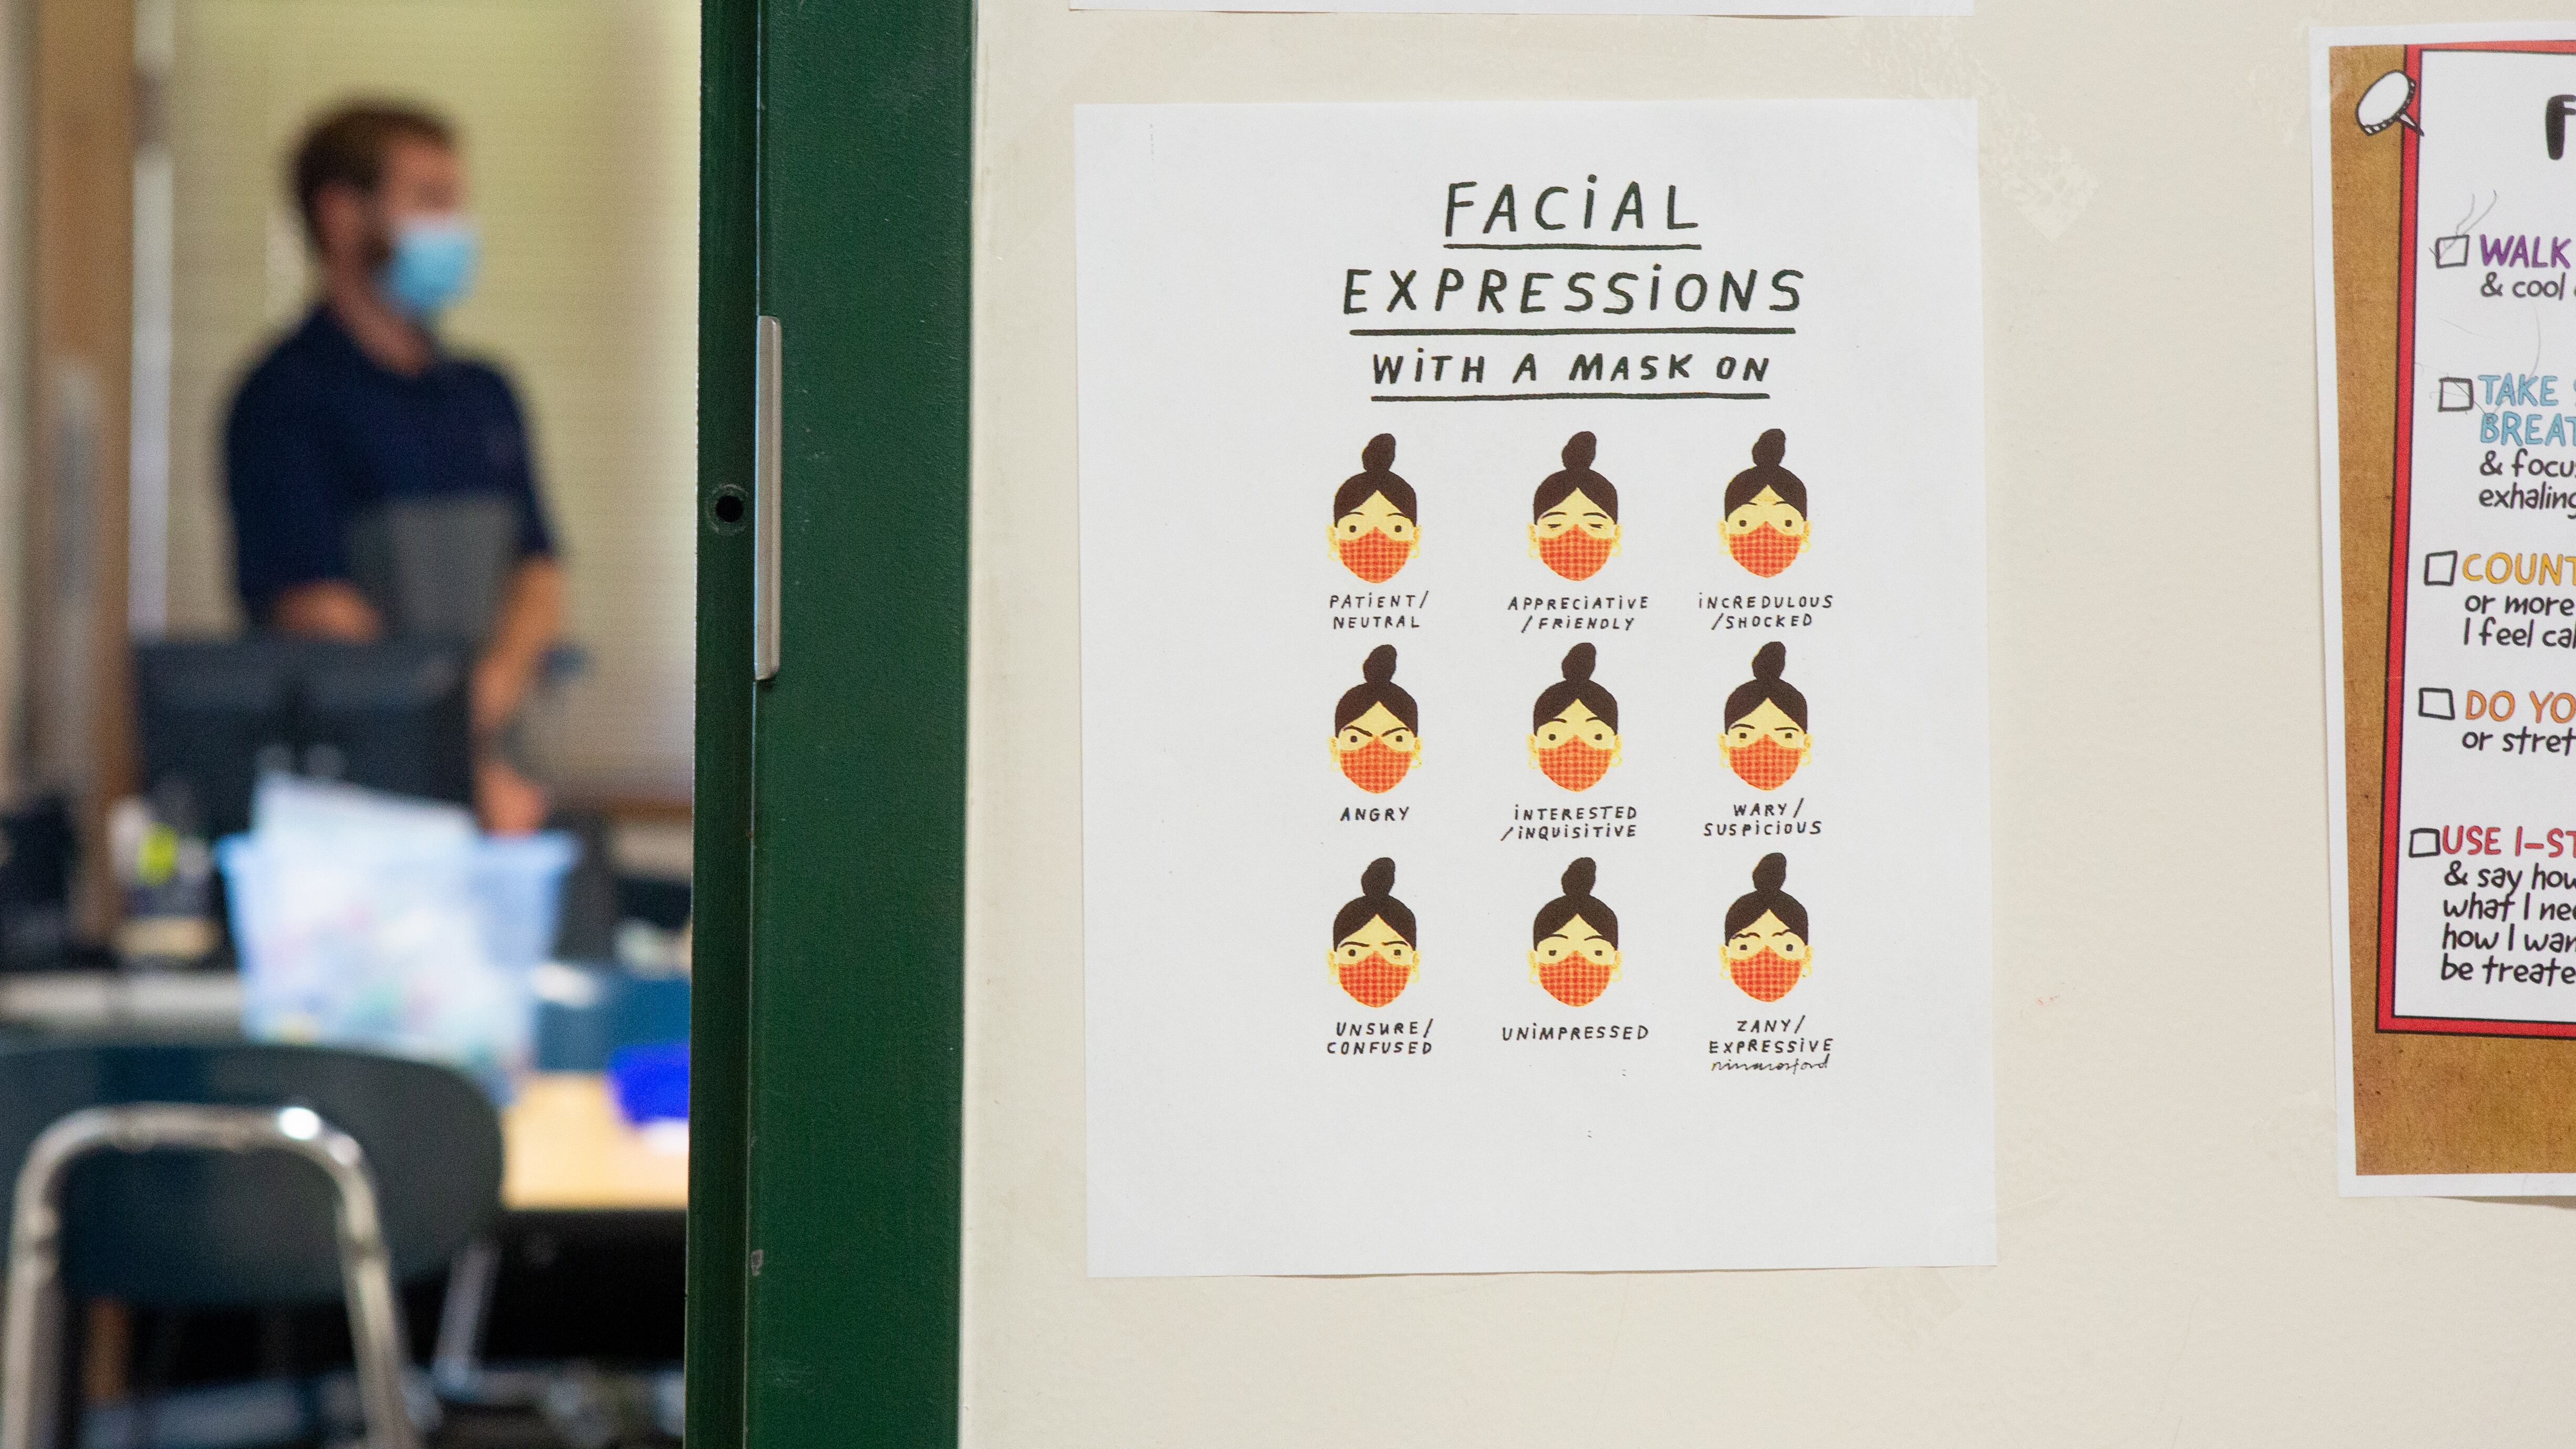 A sign that reads: Facial expressions with a mask on, posted on a wall outside a classroom, where a male is seen standing and wearing a mask.